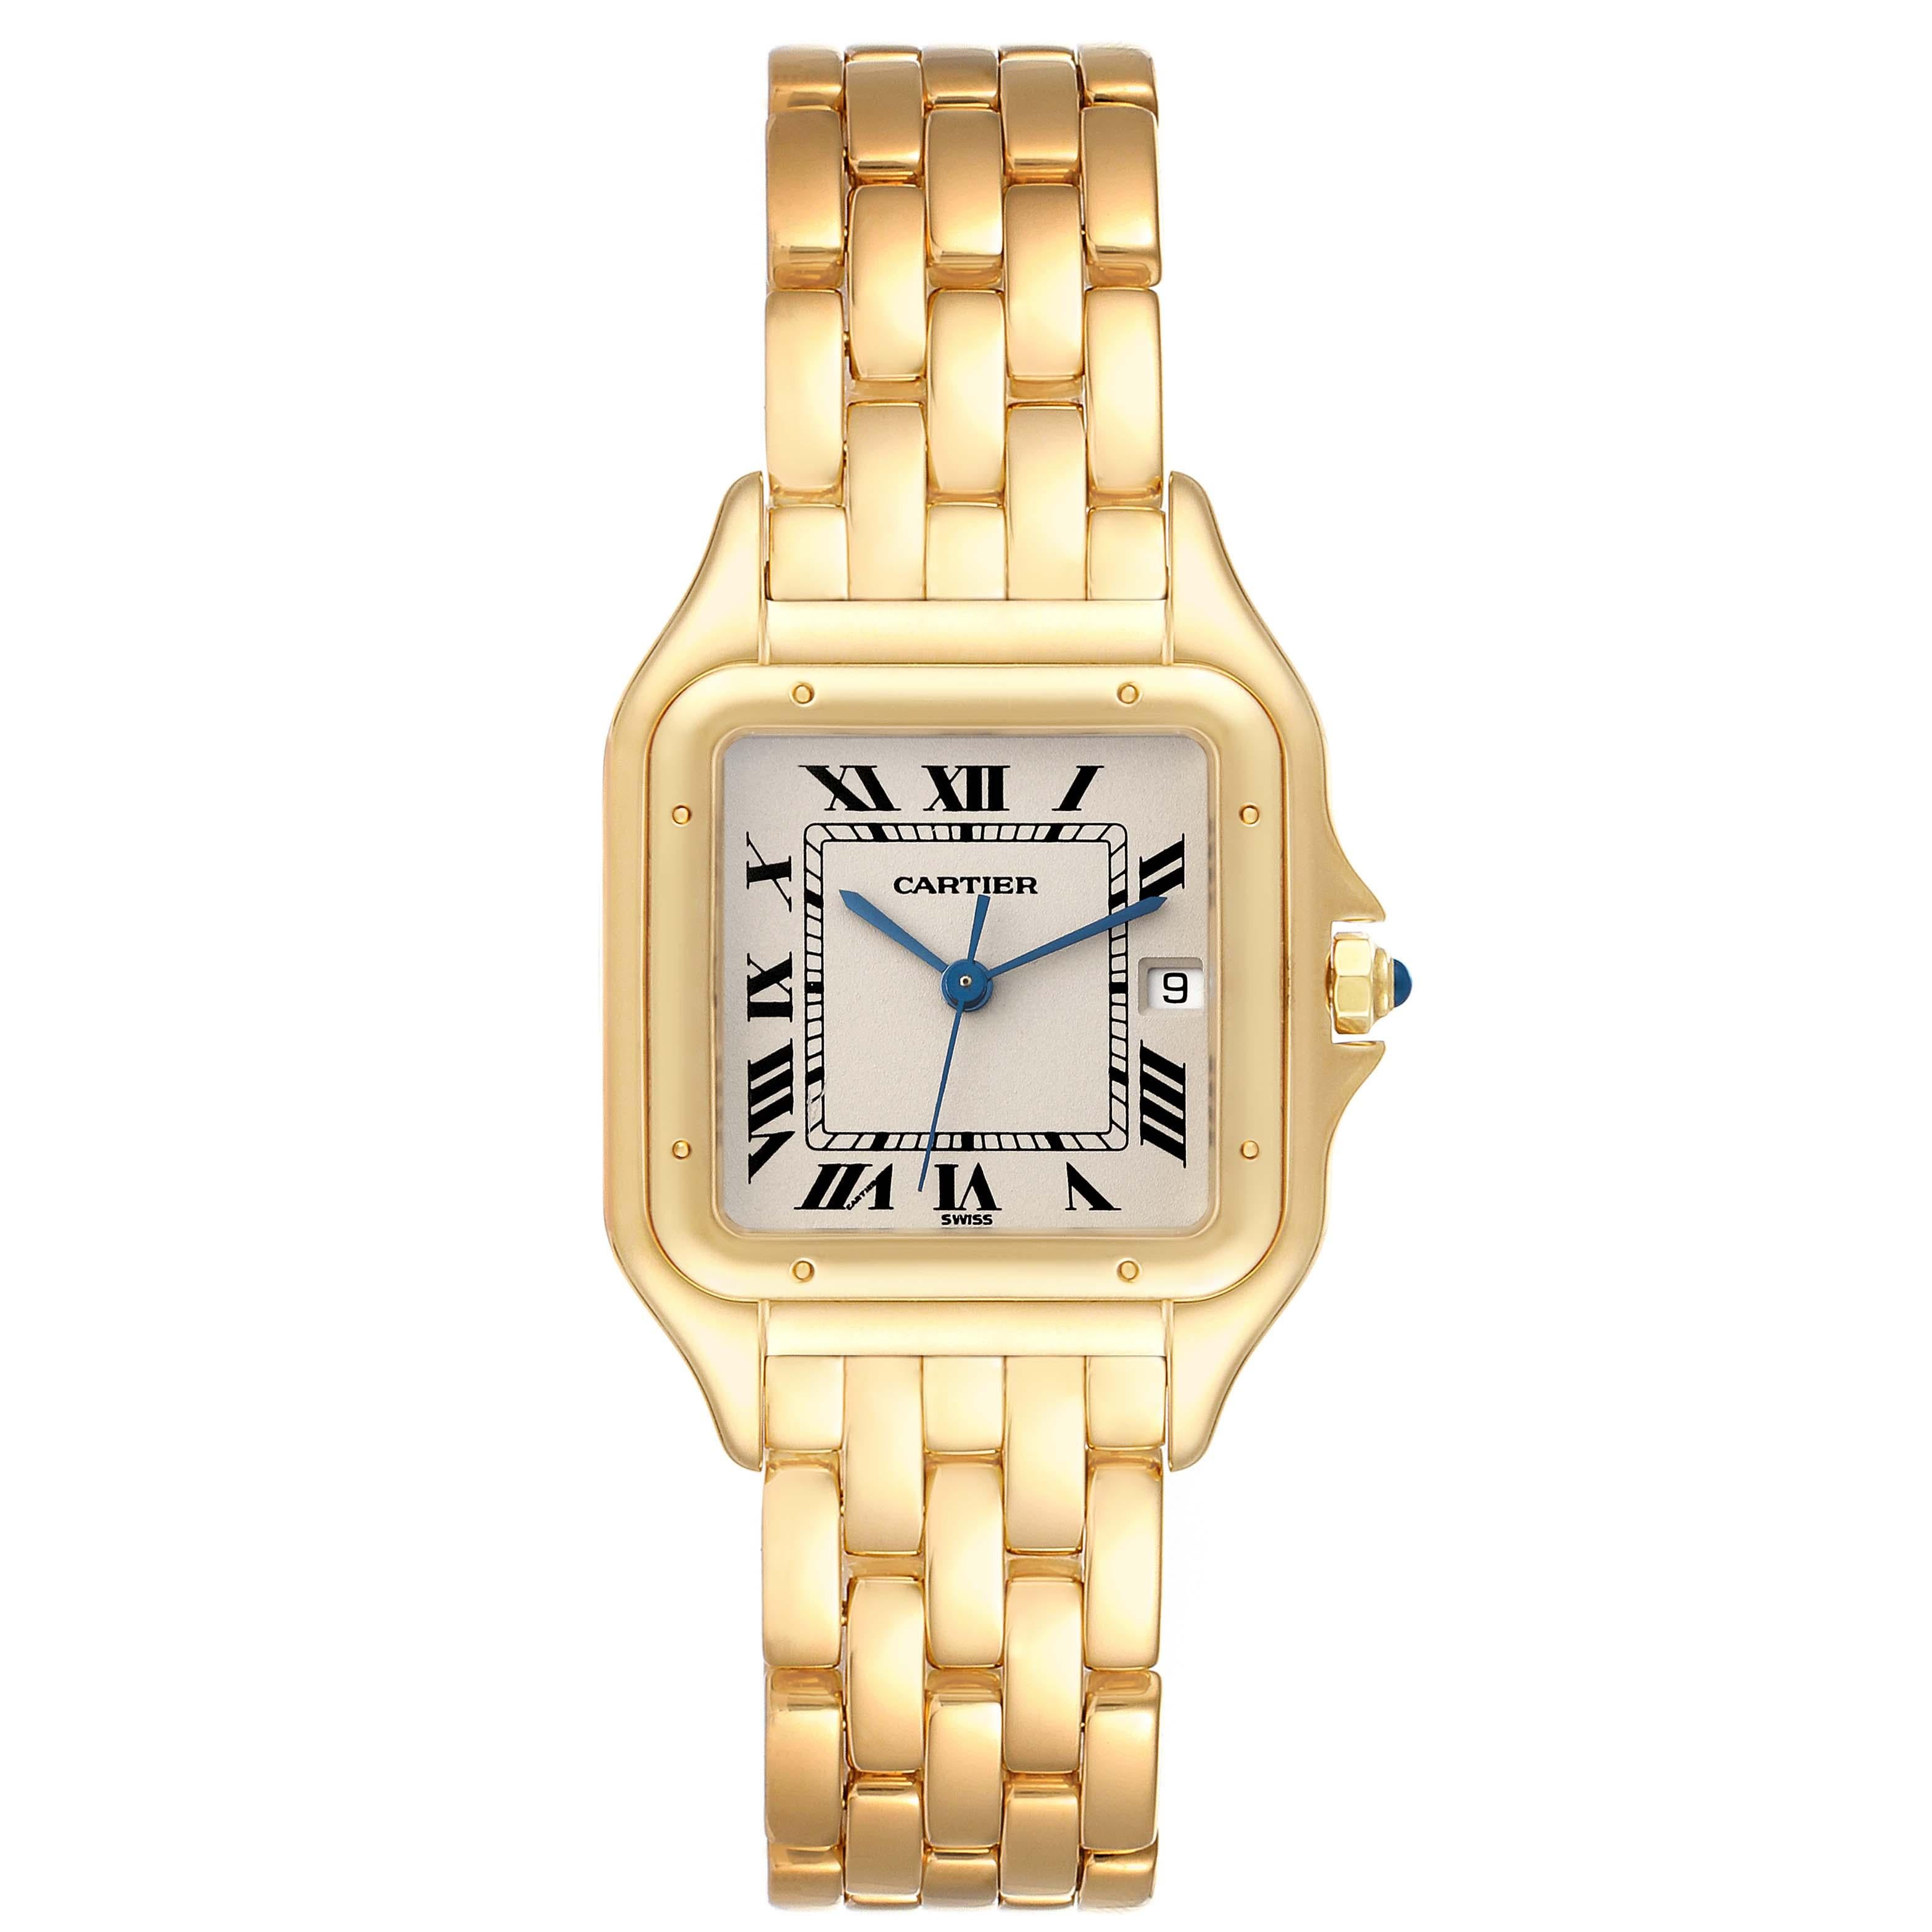 Cartier Panthere XL Yellow Gold Mens Watch W25014B9. Quartz movement. 18k yellow gold case 27 x 27 mm. Octagonal crown set with the blue sapphire cabochon. 18k yellow gold polished bezel, secured with 8 pins. Scratch resistant sapphire crystal.